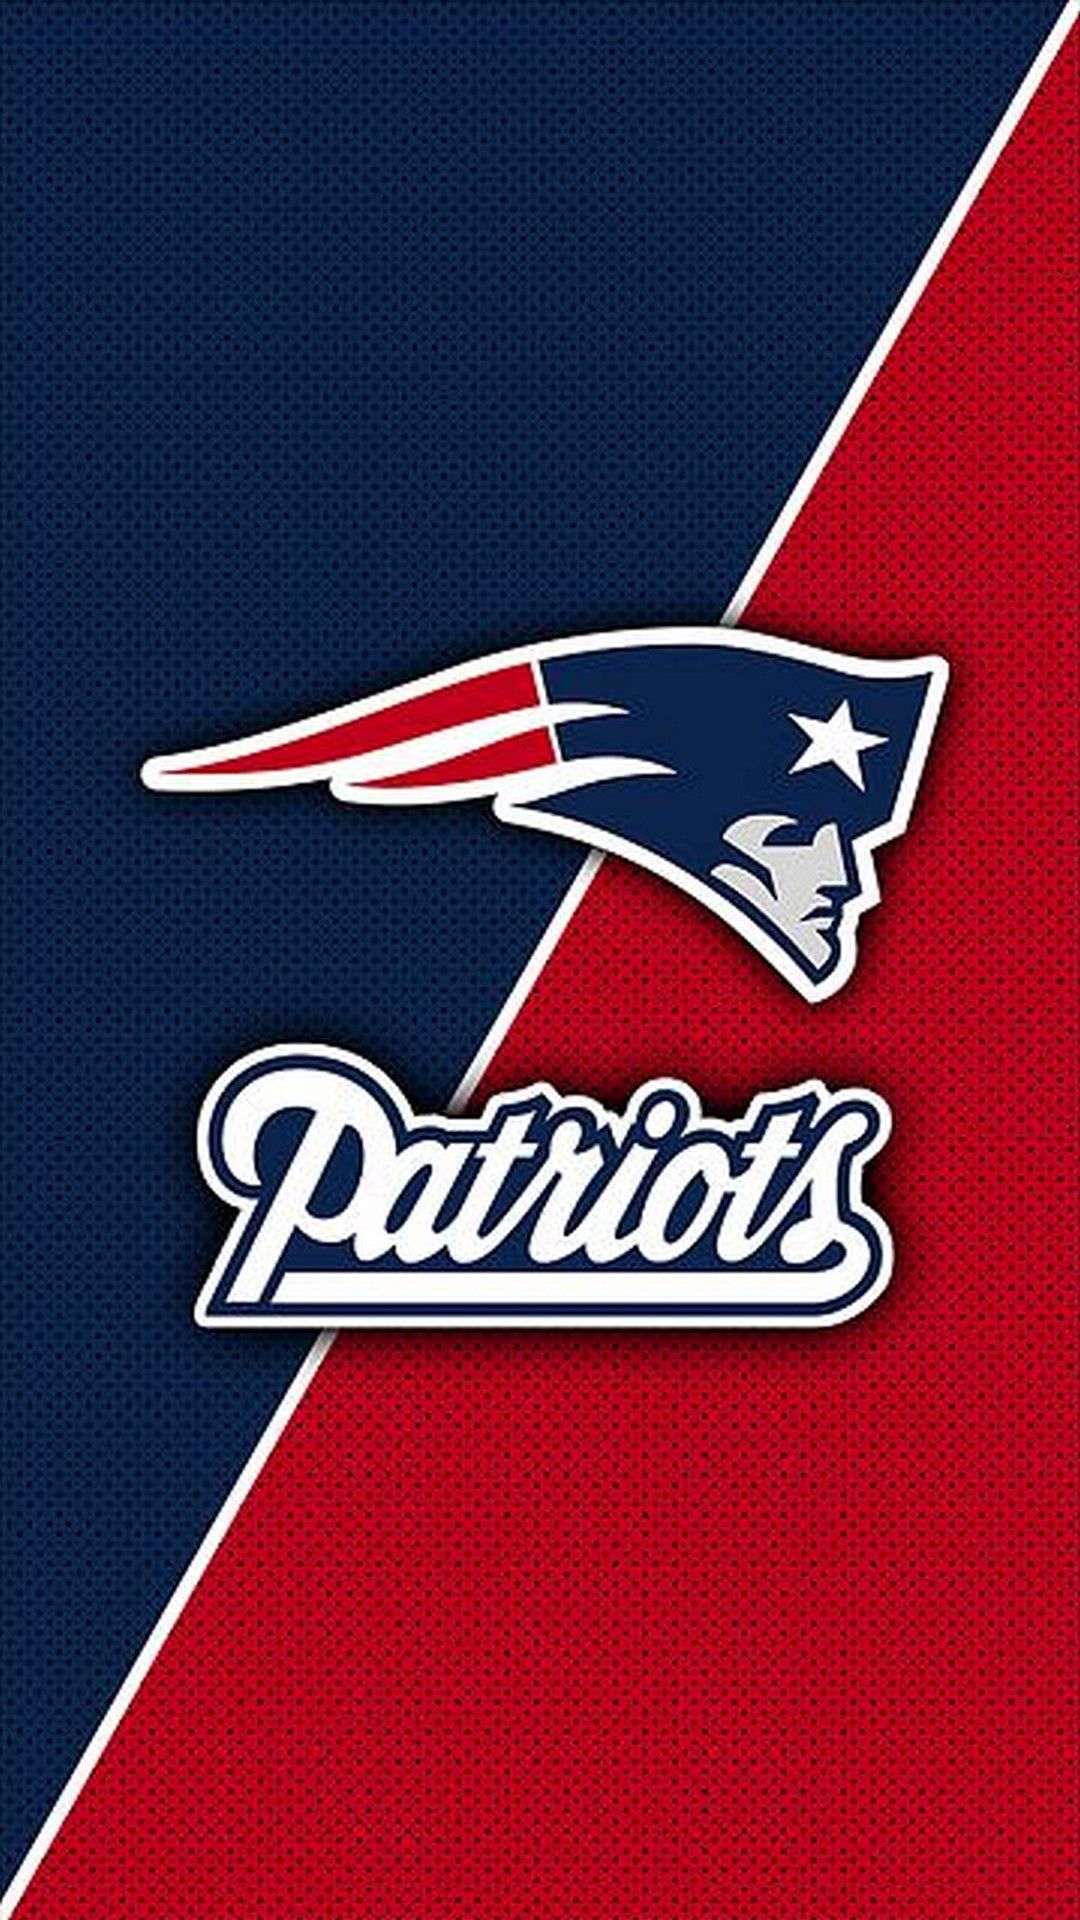 1080x1920 New England Patriots iPhone Wallpaper Tumblr is the best high-definition NFL wall&acirc;&#128;&brvbar; | New england patriots wallpaper, New england patriots logo, New england patriots